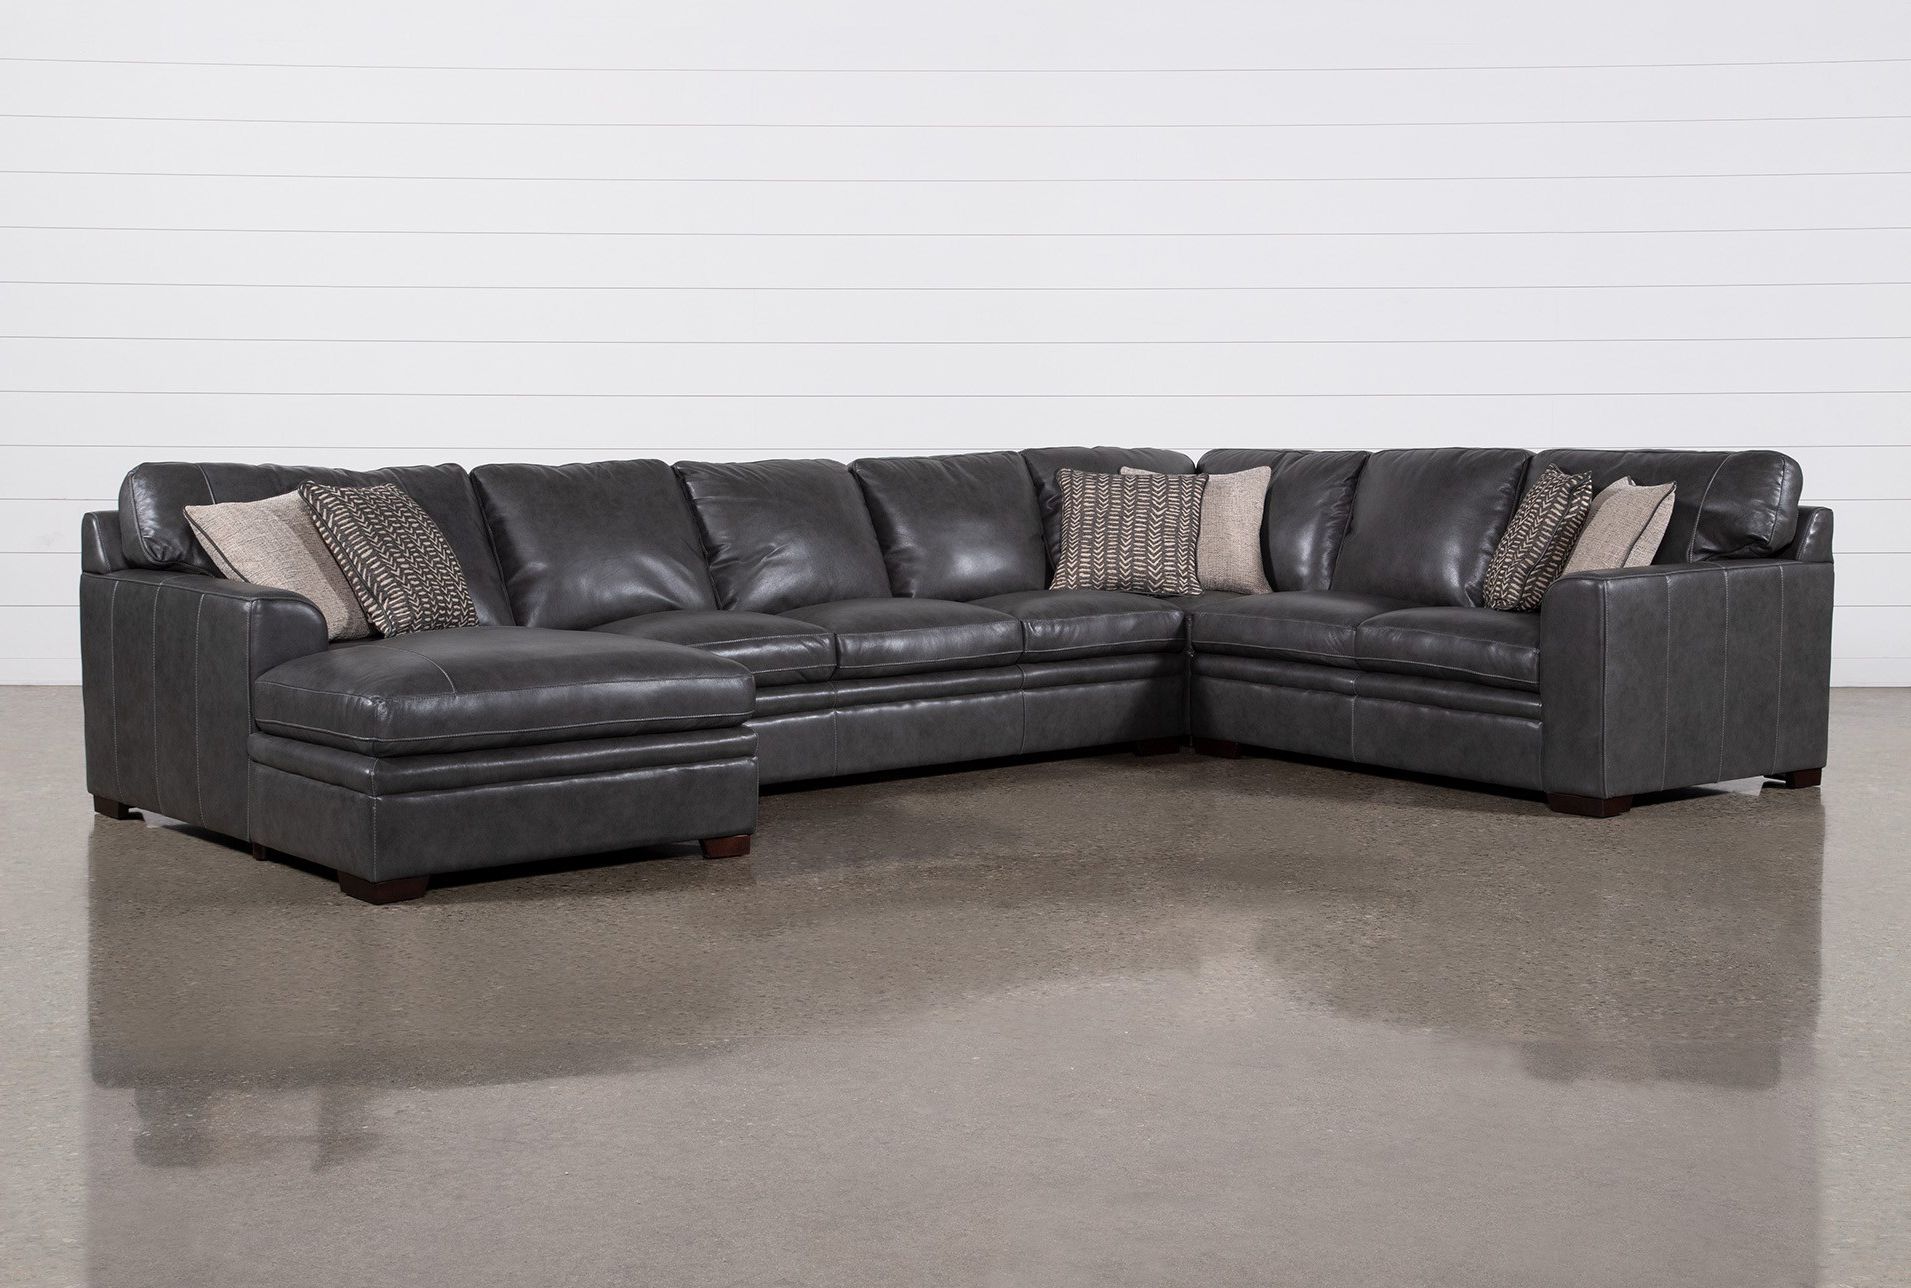 Greer Dark Grey Leather 4 Piece 166" Modular Sectional With Left Arm Regarding Dark Gray Sectional Sofas (View 10 of 20)